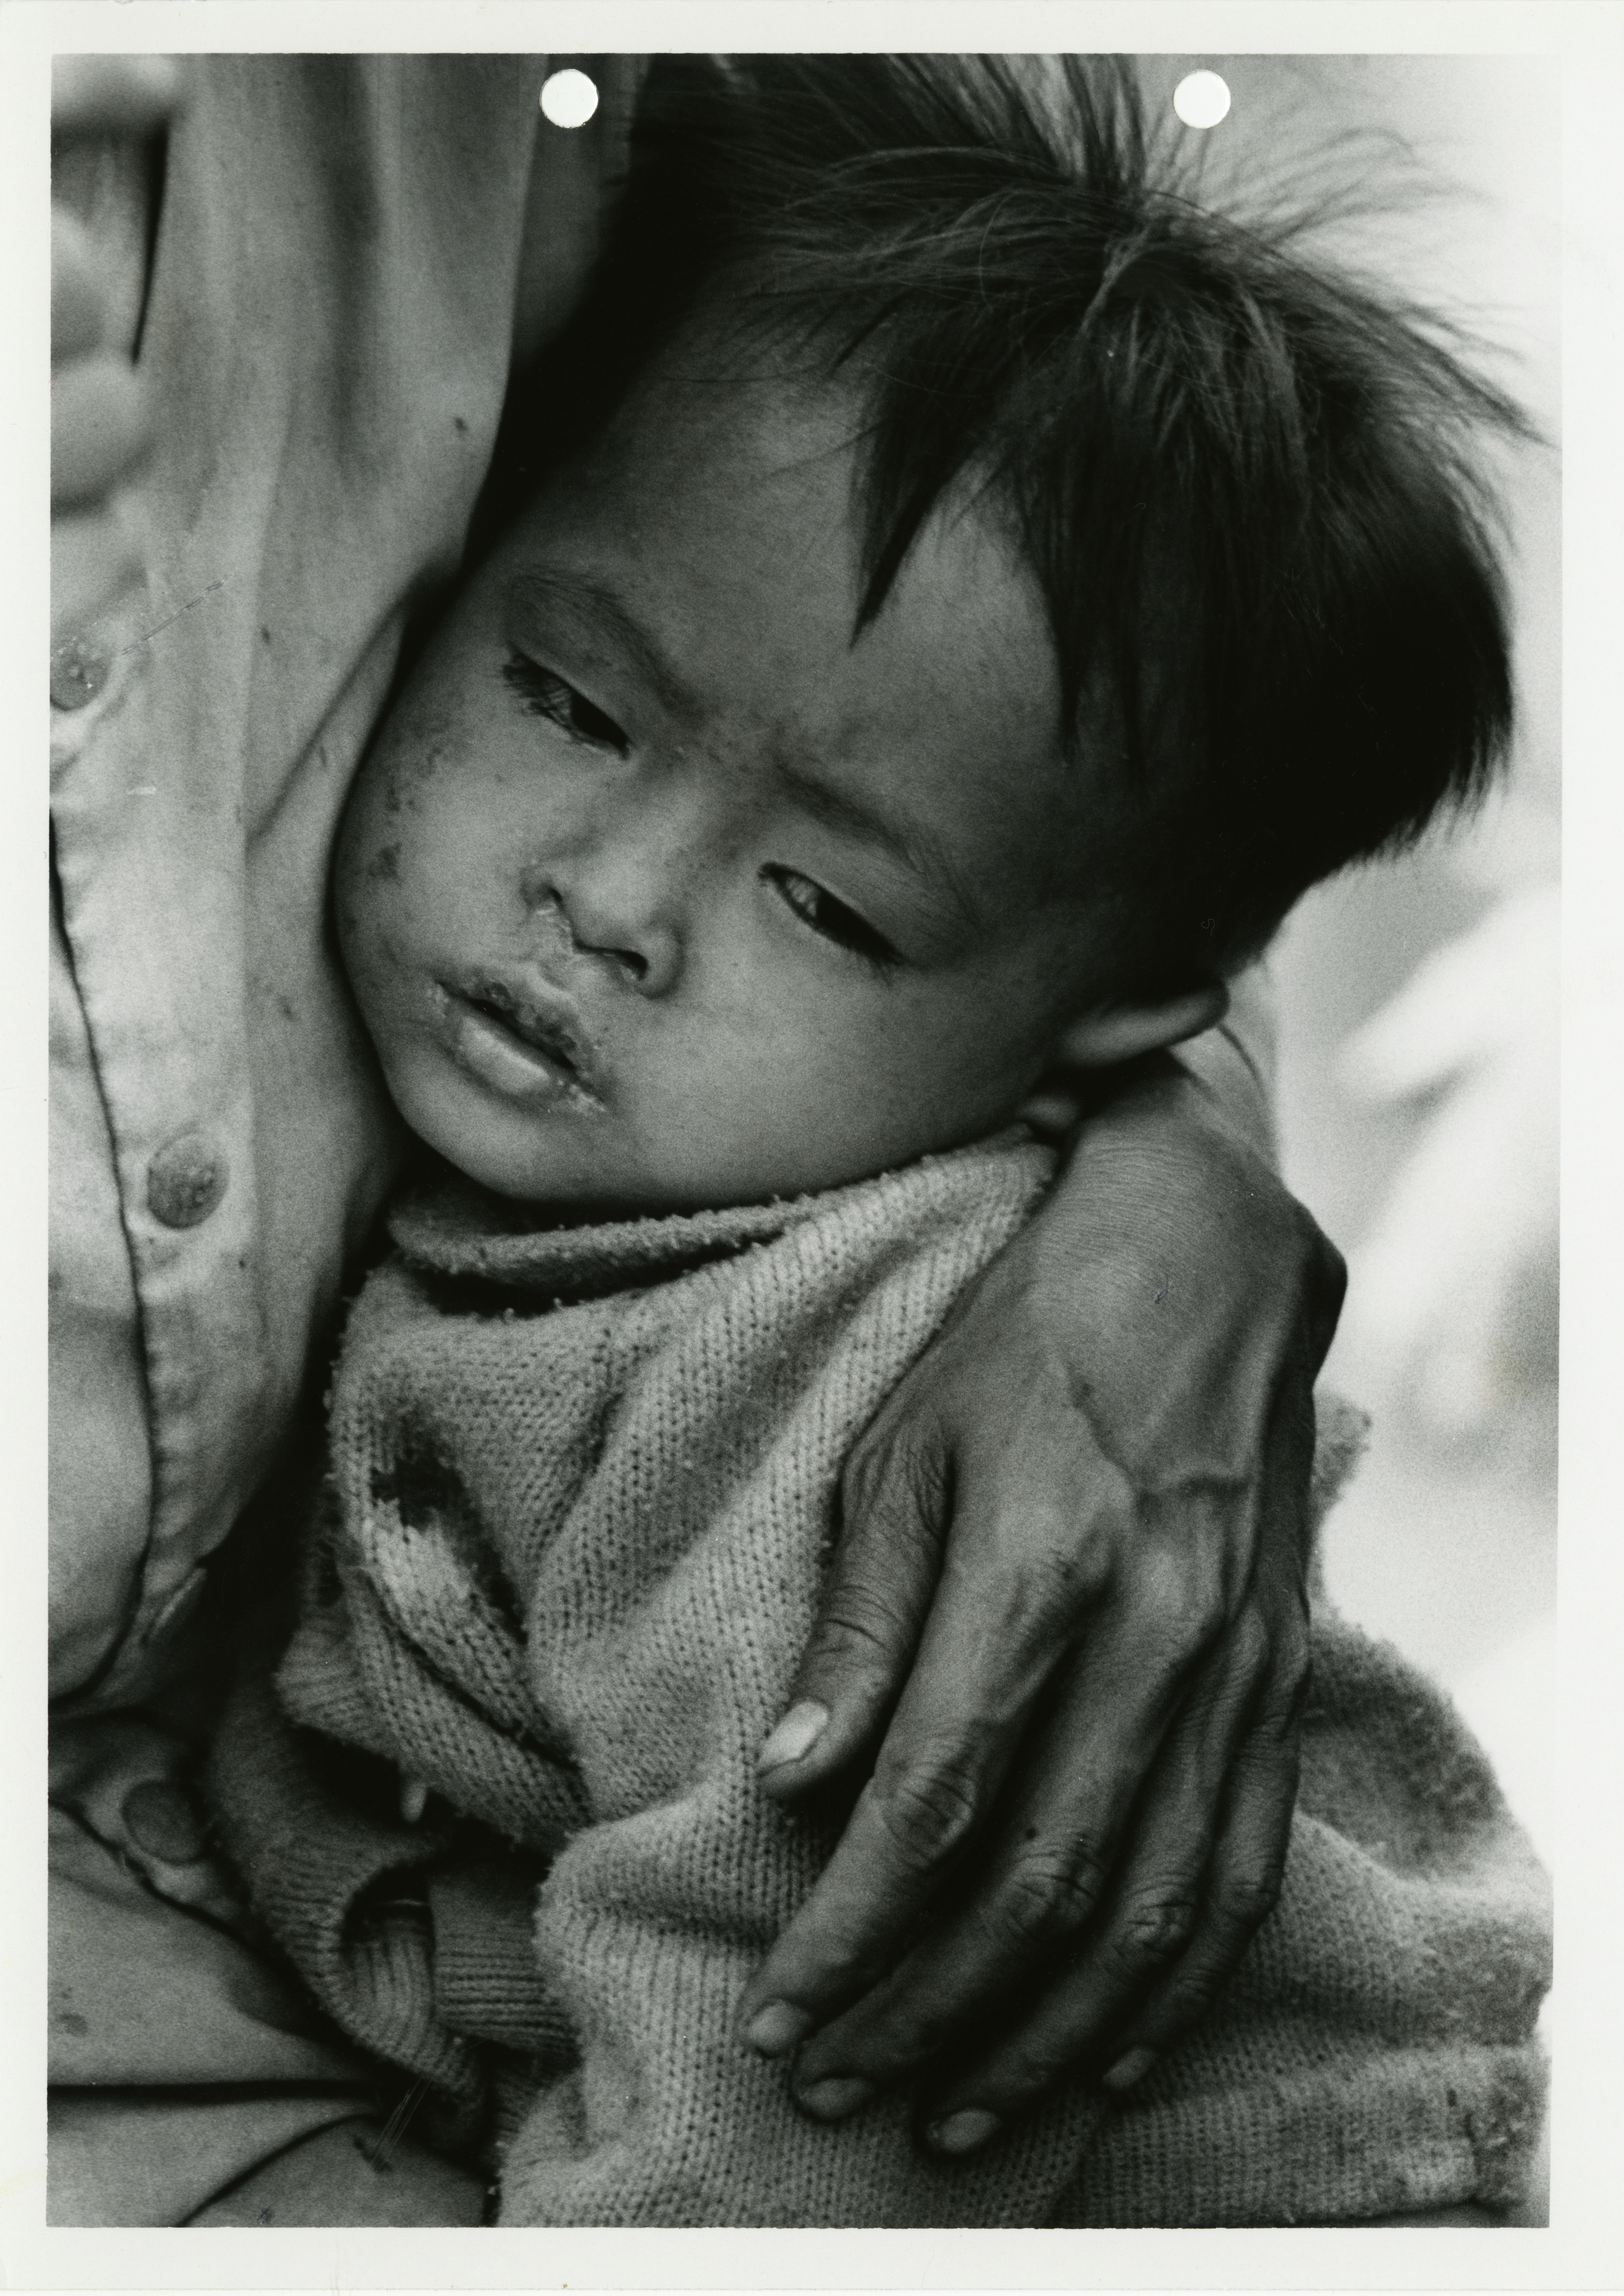 A sick Vietnamese child is comforted in its mother’s arms at Cam Rahn Bay, South Vietnam. March 29 or 30, 1975. 